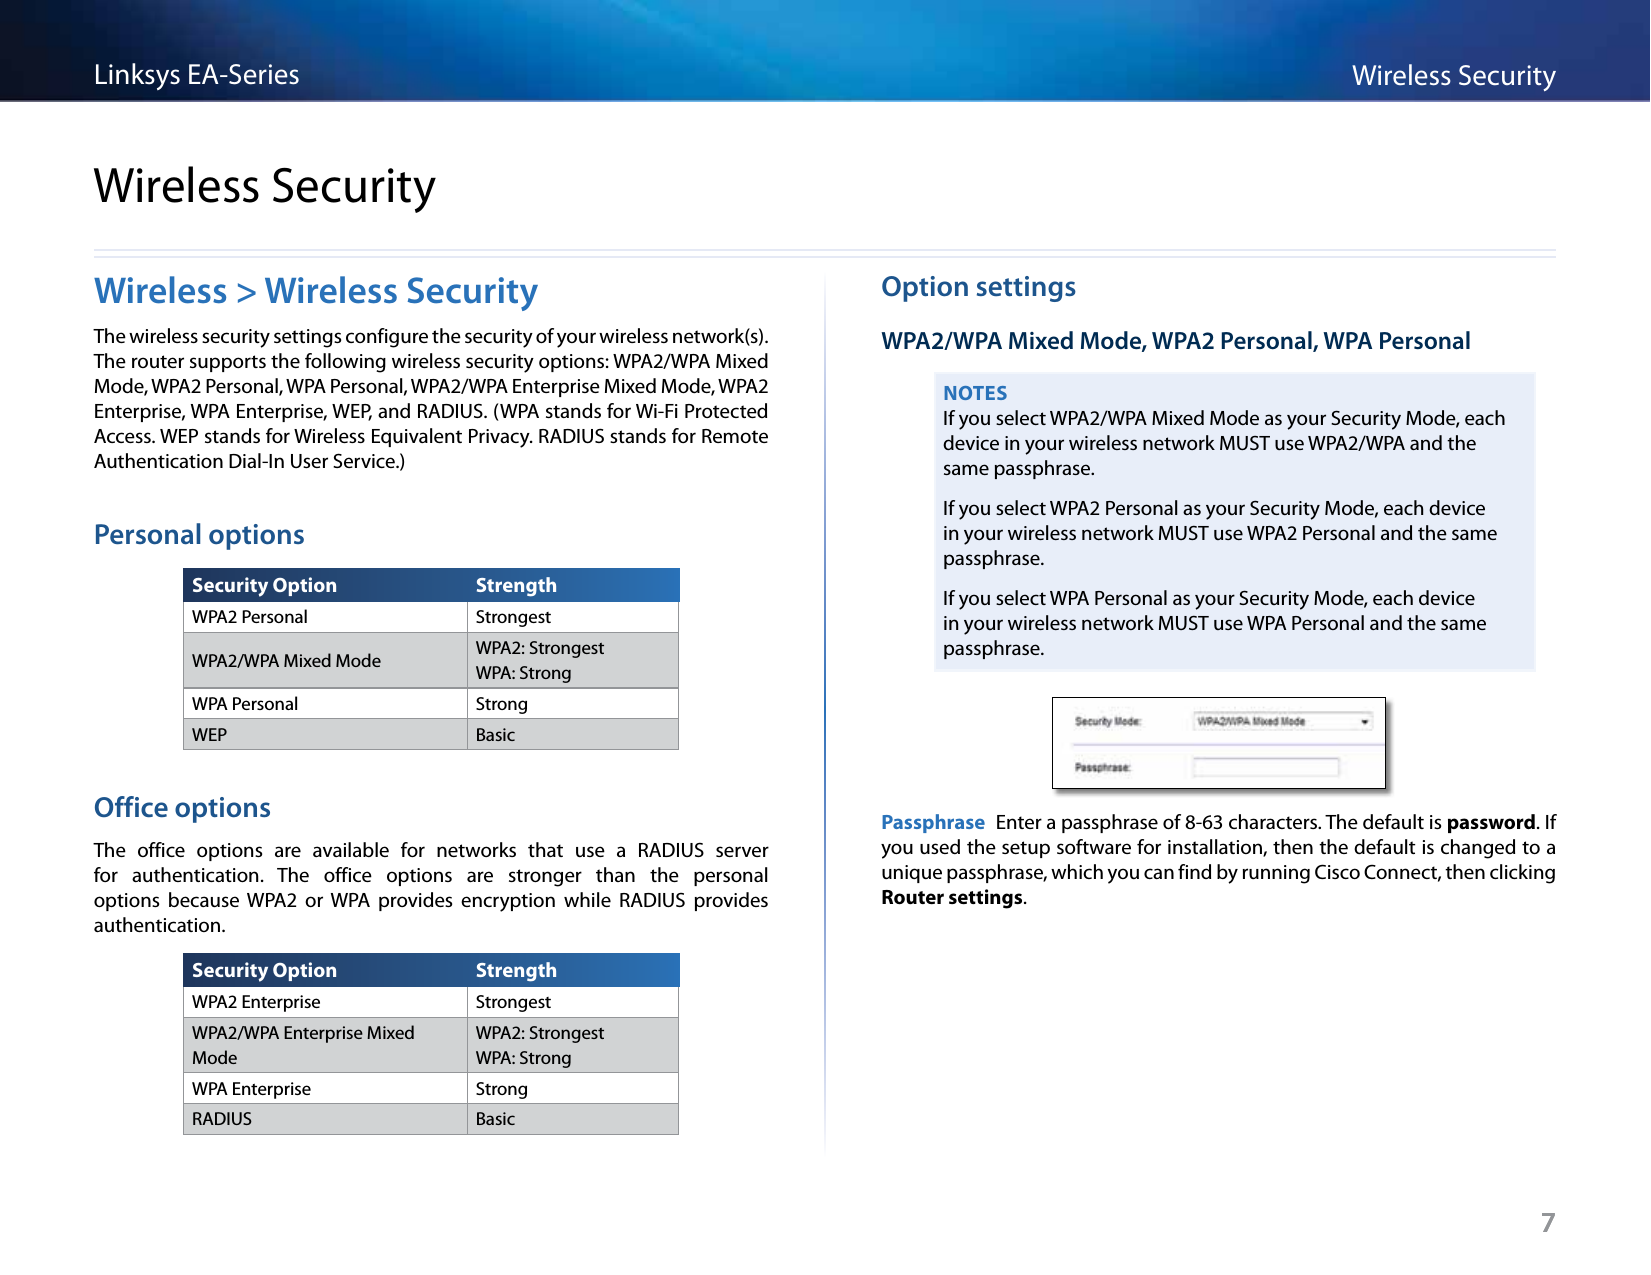 7Wireless SecurityLinksys EA-Series7Wireless &gt; Wireless SecurityThe wireless security settings configure the security of your wireless network(s). The router supports the following wireless security options: WPA2/WPA Mixed Mode, WPA2 Personal, WPA Personal, WPA2/WPA Enterprise Mixed Mode, WPA2 Enterprise, WPA Enterprise, WEP, and RADIUS. (WPA stands for Wi-Fi Protected Access. WEP stands for Wireless Equivalent Privacy. RADIUS stands for Remote Authentication Dial-In User Service.)Personal optionsSecurity Option StrengthWPA2 Personal StrongestWPA2/WPA Mixed Mode WPA2: Strongest WPA: StrongWPA Personal StrongWEP BasicOffice optionsThe  office  options  are  available  for  networks  that  use  a  RADIUS  server for  authentication.  The  office  options  are  stronger  than  the  personal options  because  WPA2  or WPA  provides  encryption  while  RADIUS  provides authentication.Security Option StrengthWPA2 Enterprise StrongestWPA2/WPA Enterprise Mixed ModeWPA2: Strongest WPA: StrongWPA Enterprise StrongRADIUS BasicOption settingsWPA2/WPA Mixed Mode, WPA2 Personal, WPA PersonalNOTESIf you select WPA2/WPA Mixed Mode as your Security Mode, each device in your wireless network MUST use WPA2/WPA and the same passphrase.If you select WPA2 Personal as your Security Mode, each device in your wireless network MUST use WPA2 Personal and the same passphrase.If you select WPA Personal as your Security Mode, each device in your wireless network MUST use WPA Personal and the same passphrase.Passphrase  Enter a passphrase of 8-63 characters. The default is password. If you used the setup software for installation, then the default is changed to a unique passphrase, which you can find by running Cisco Connect, then clicking Router settings.Wireless Security